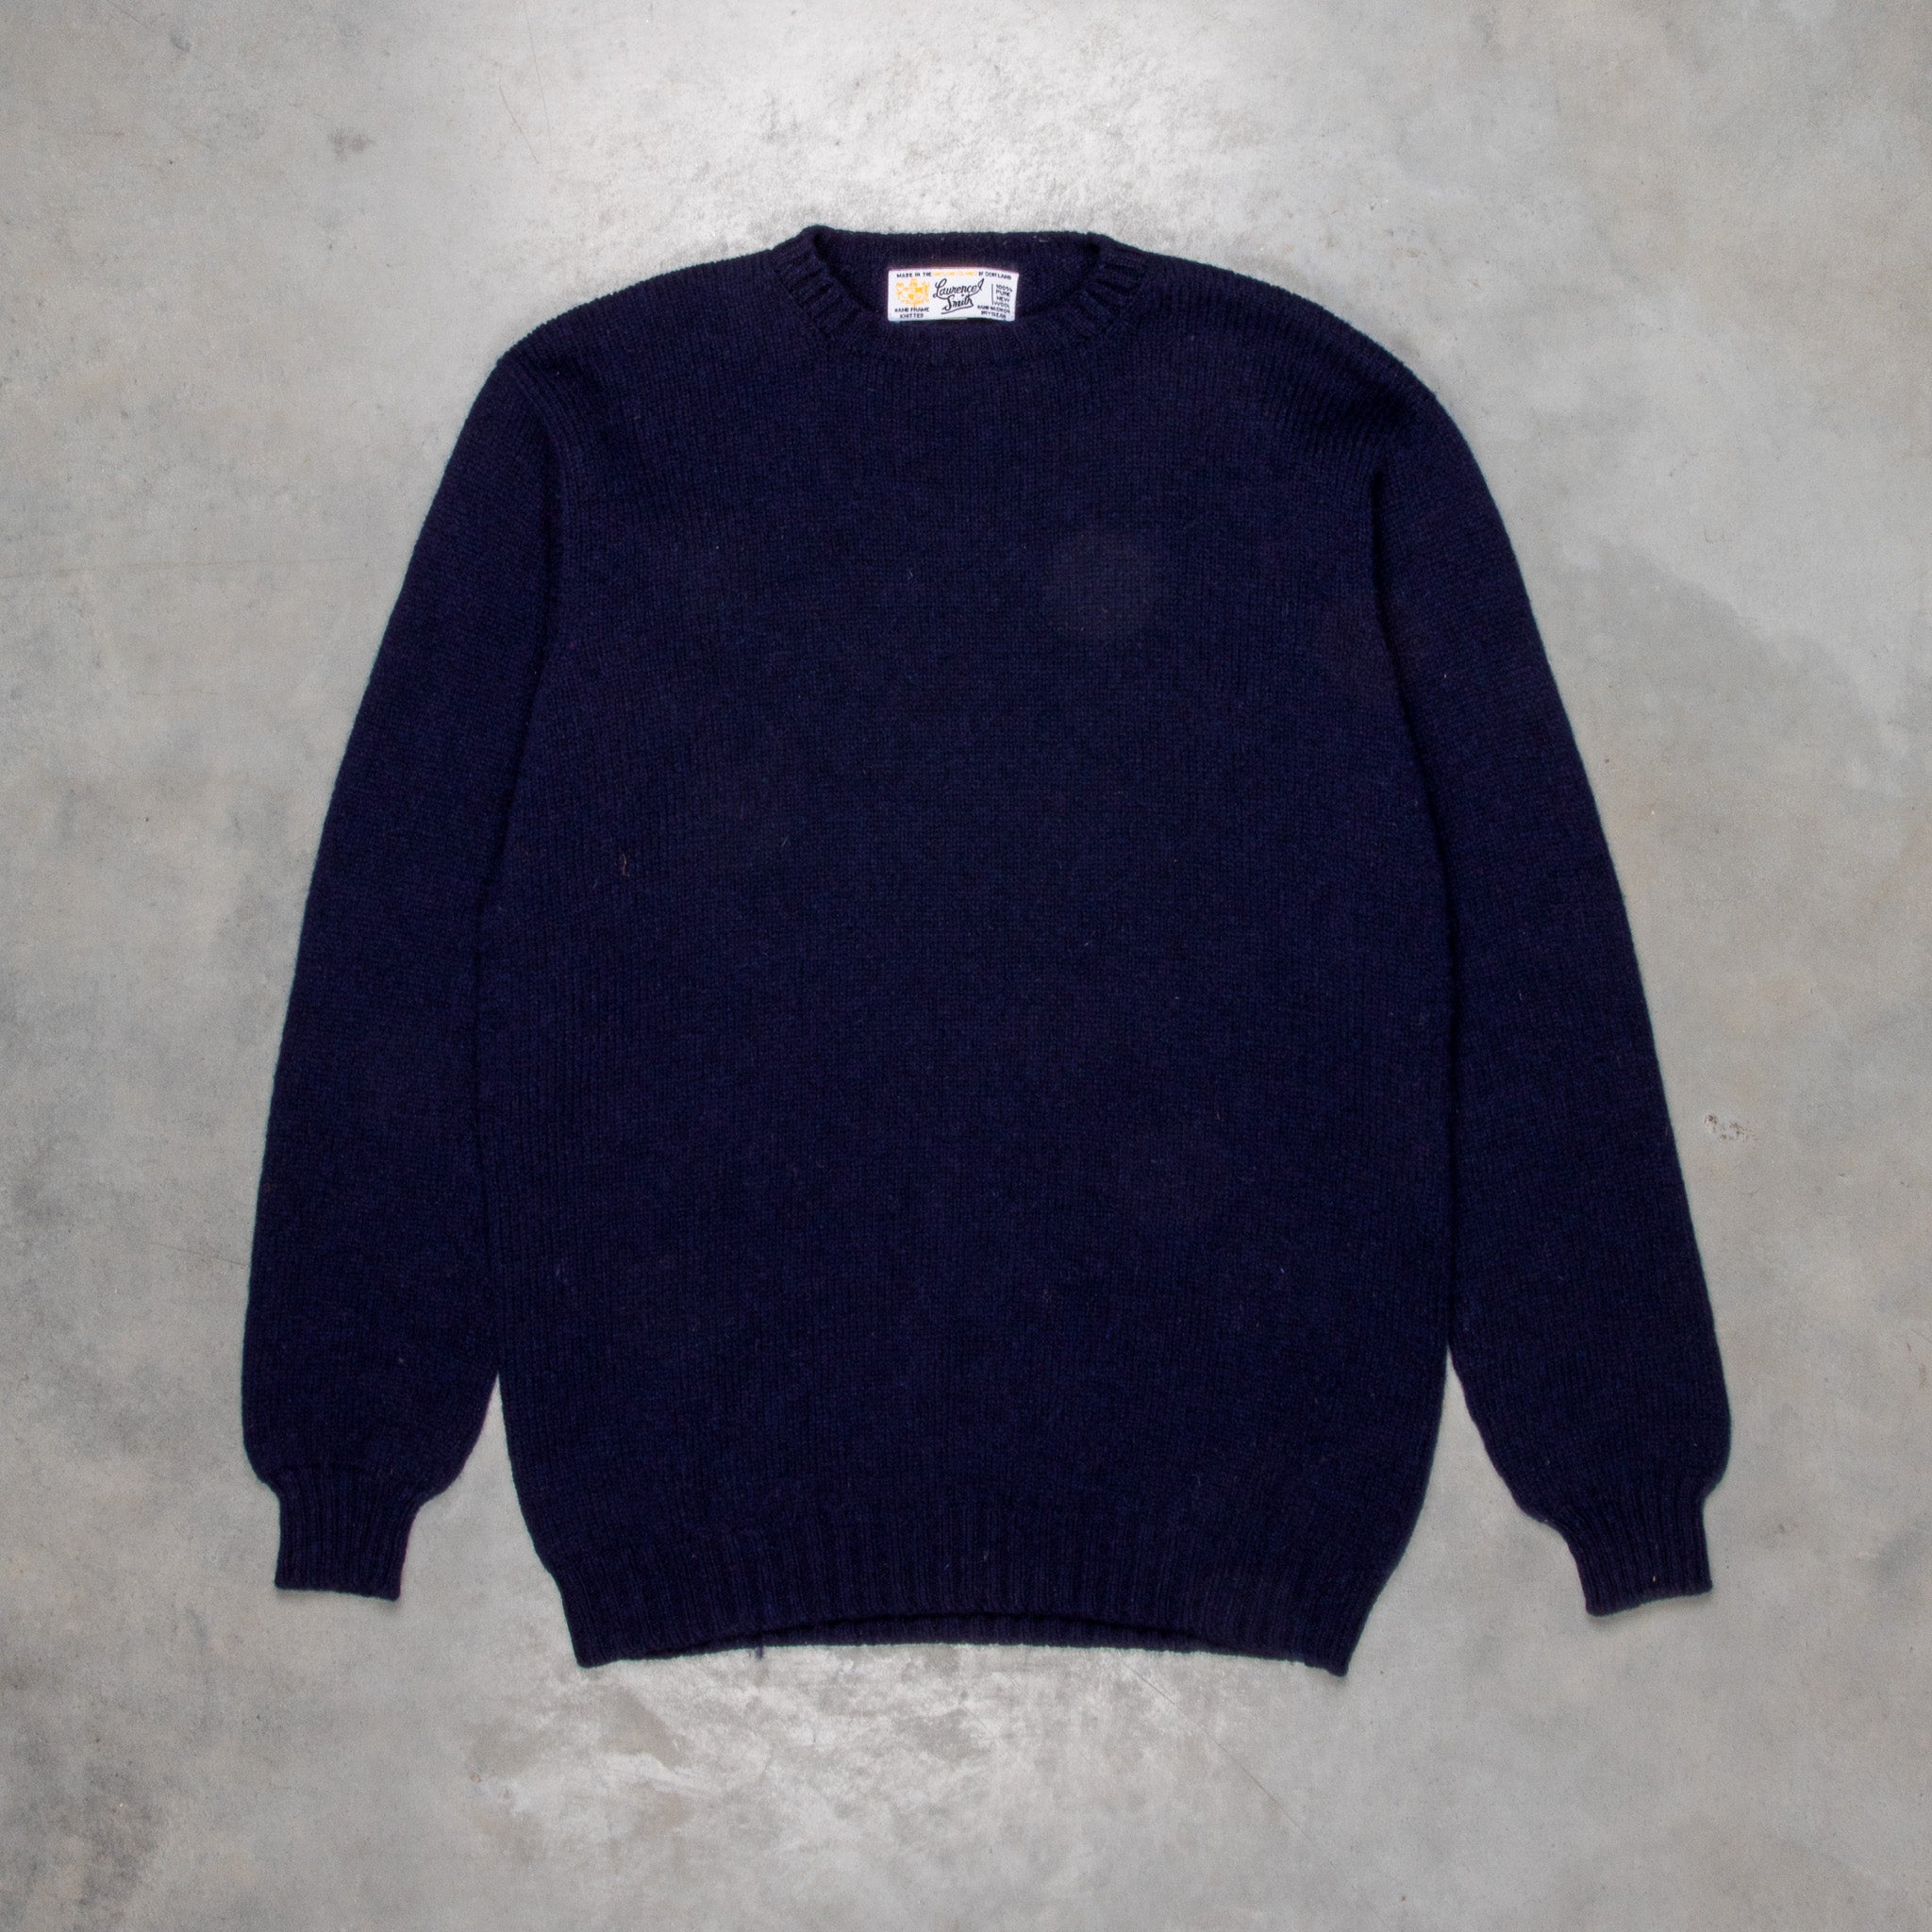 Laurence J. Smith  Super soft Seamless Crew Neck Pullover New Navy